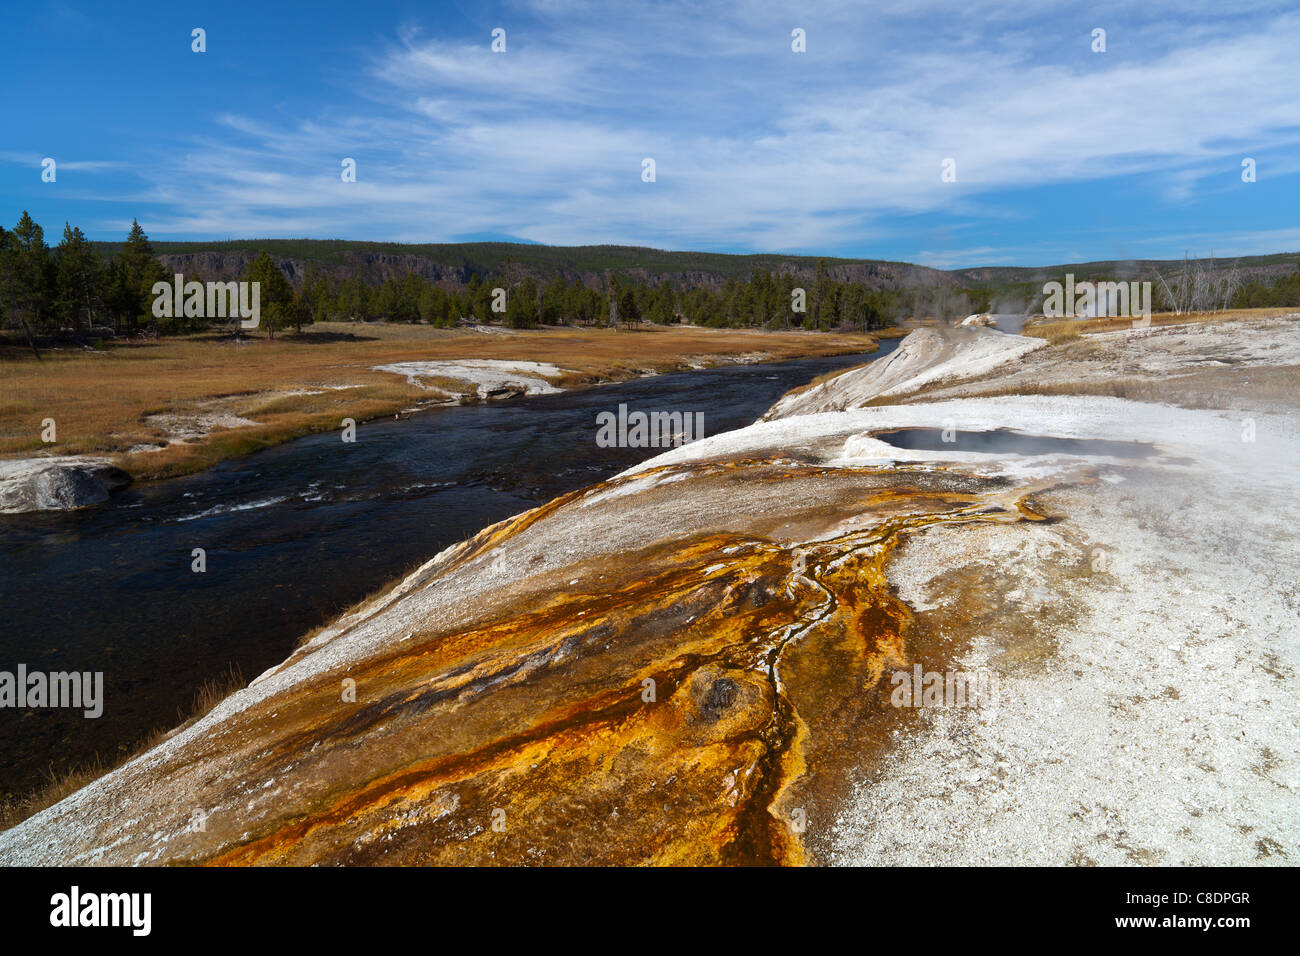 This is an image taken in the area around Old Faithful Geyser. Stock Photo